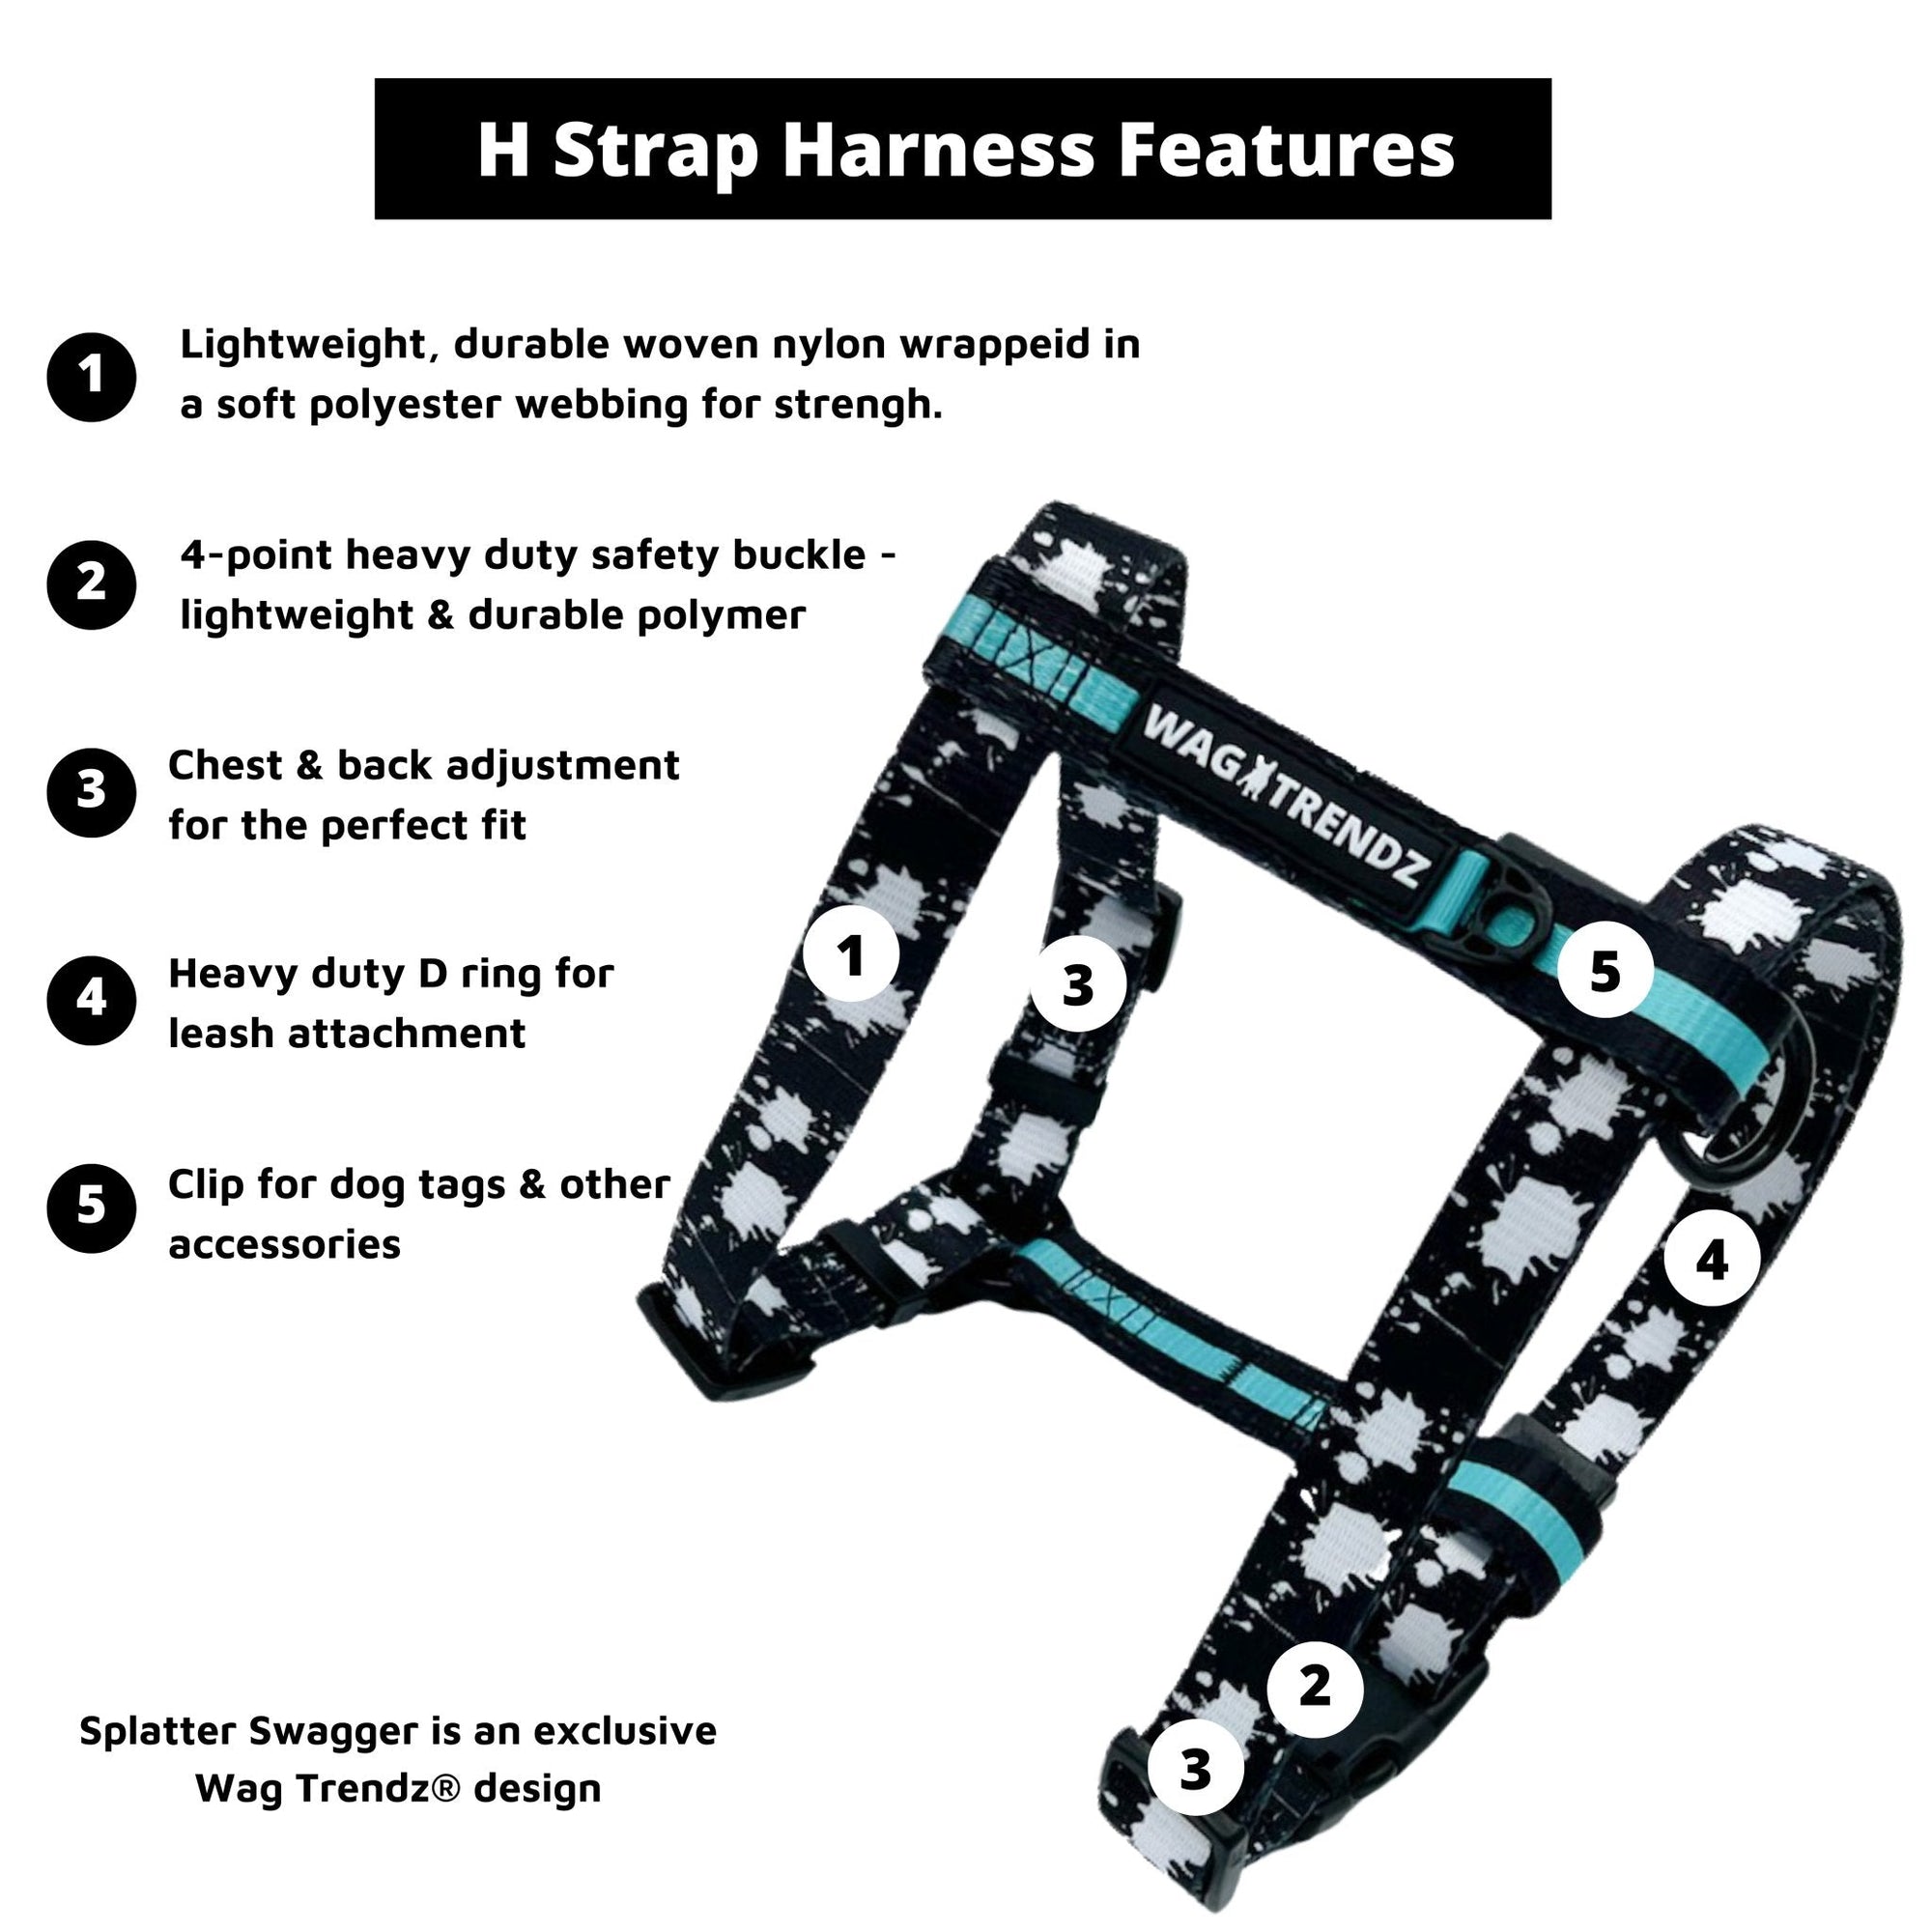 H Dog Harness - Roman Dog Harness - black with white paint splatter dog strap harness with bold teal accent against white background - Wag Trendz